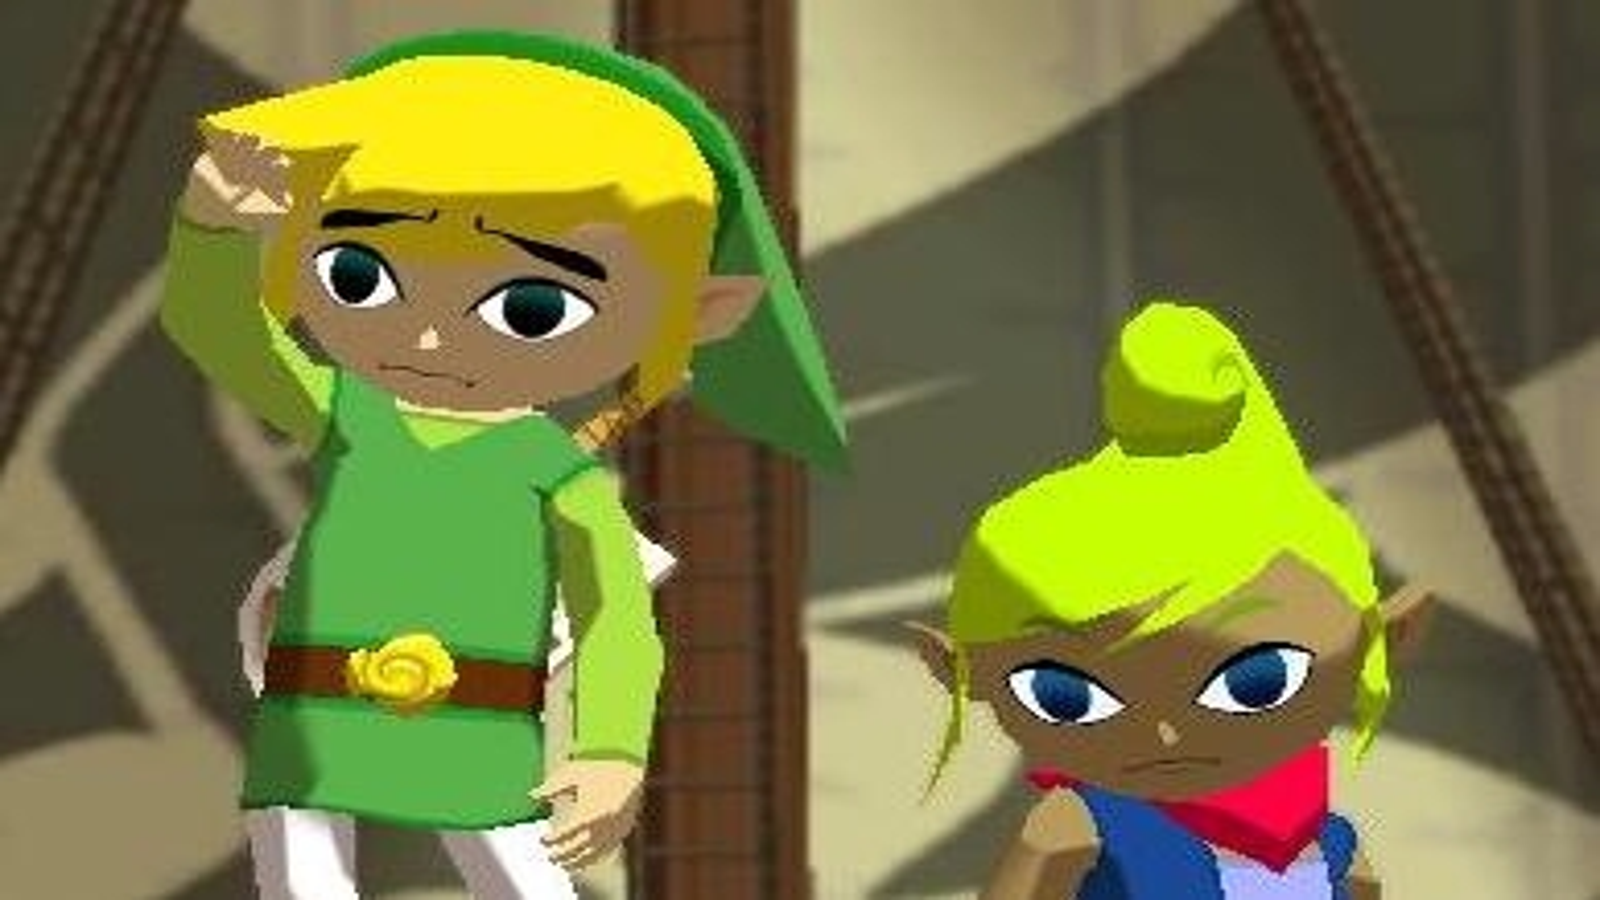 As Zelda: Wind Waker Turns 20, Doesn't Toon Link Deserve A Second Chance?